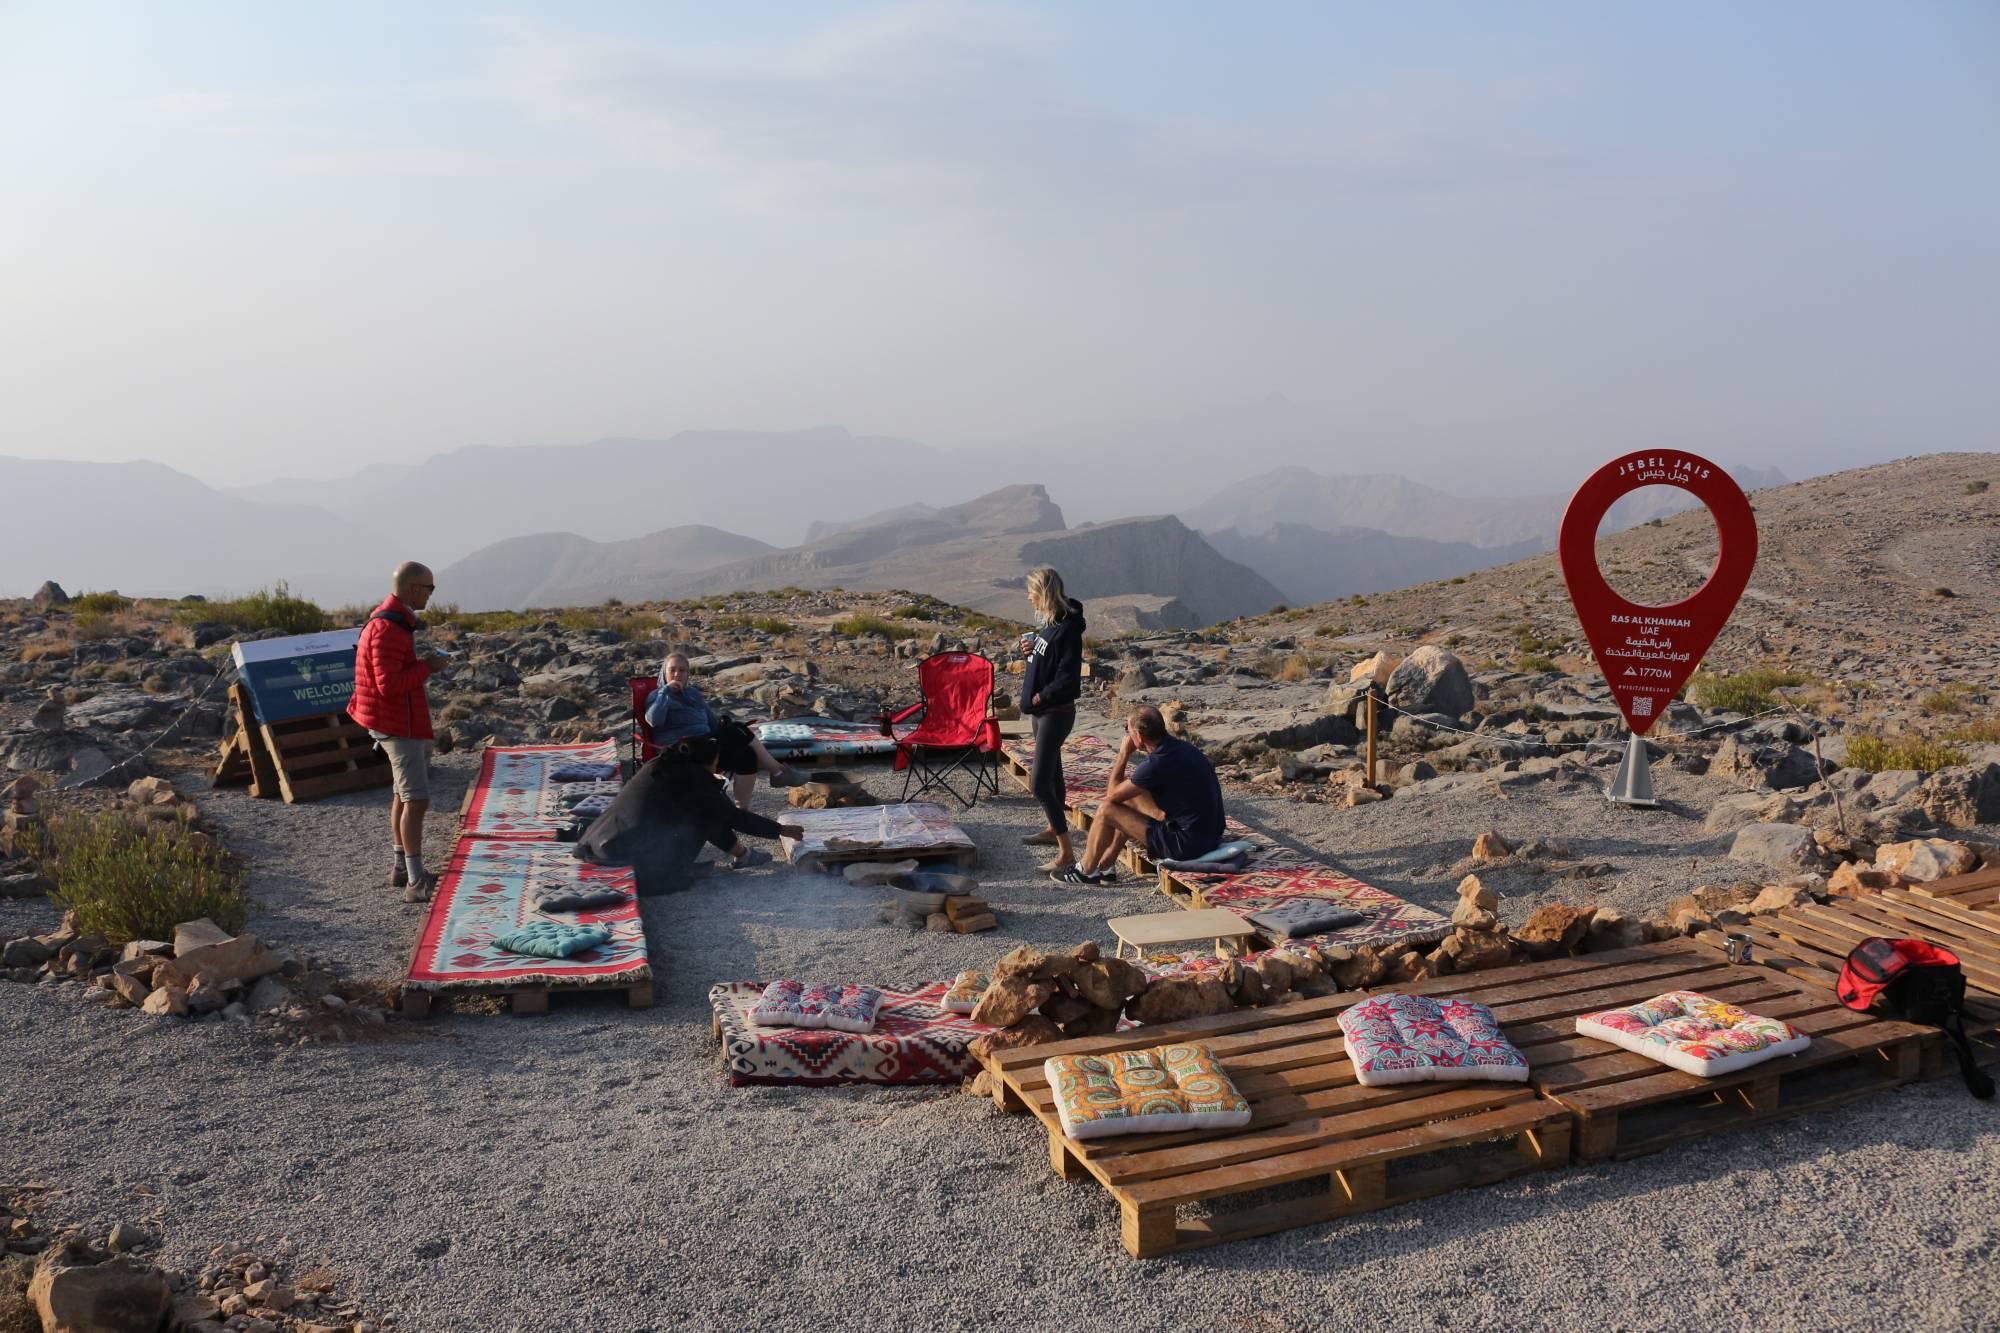 Camp at the highest point in the UAE